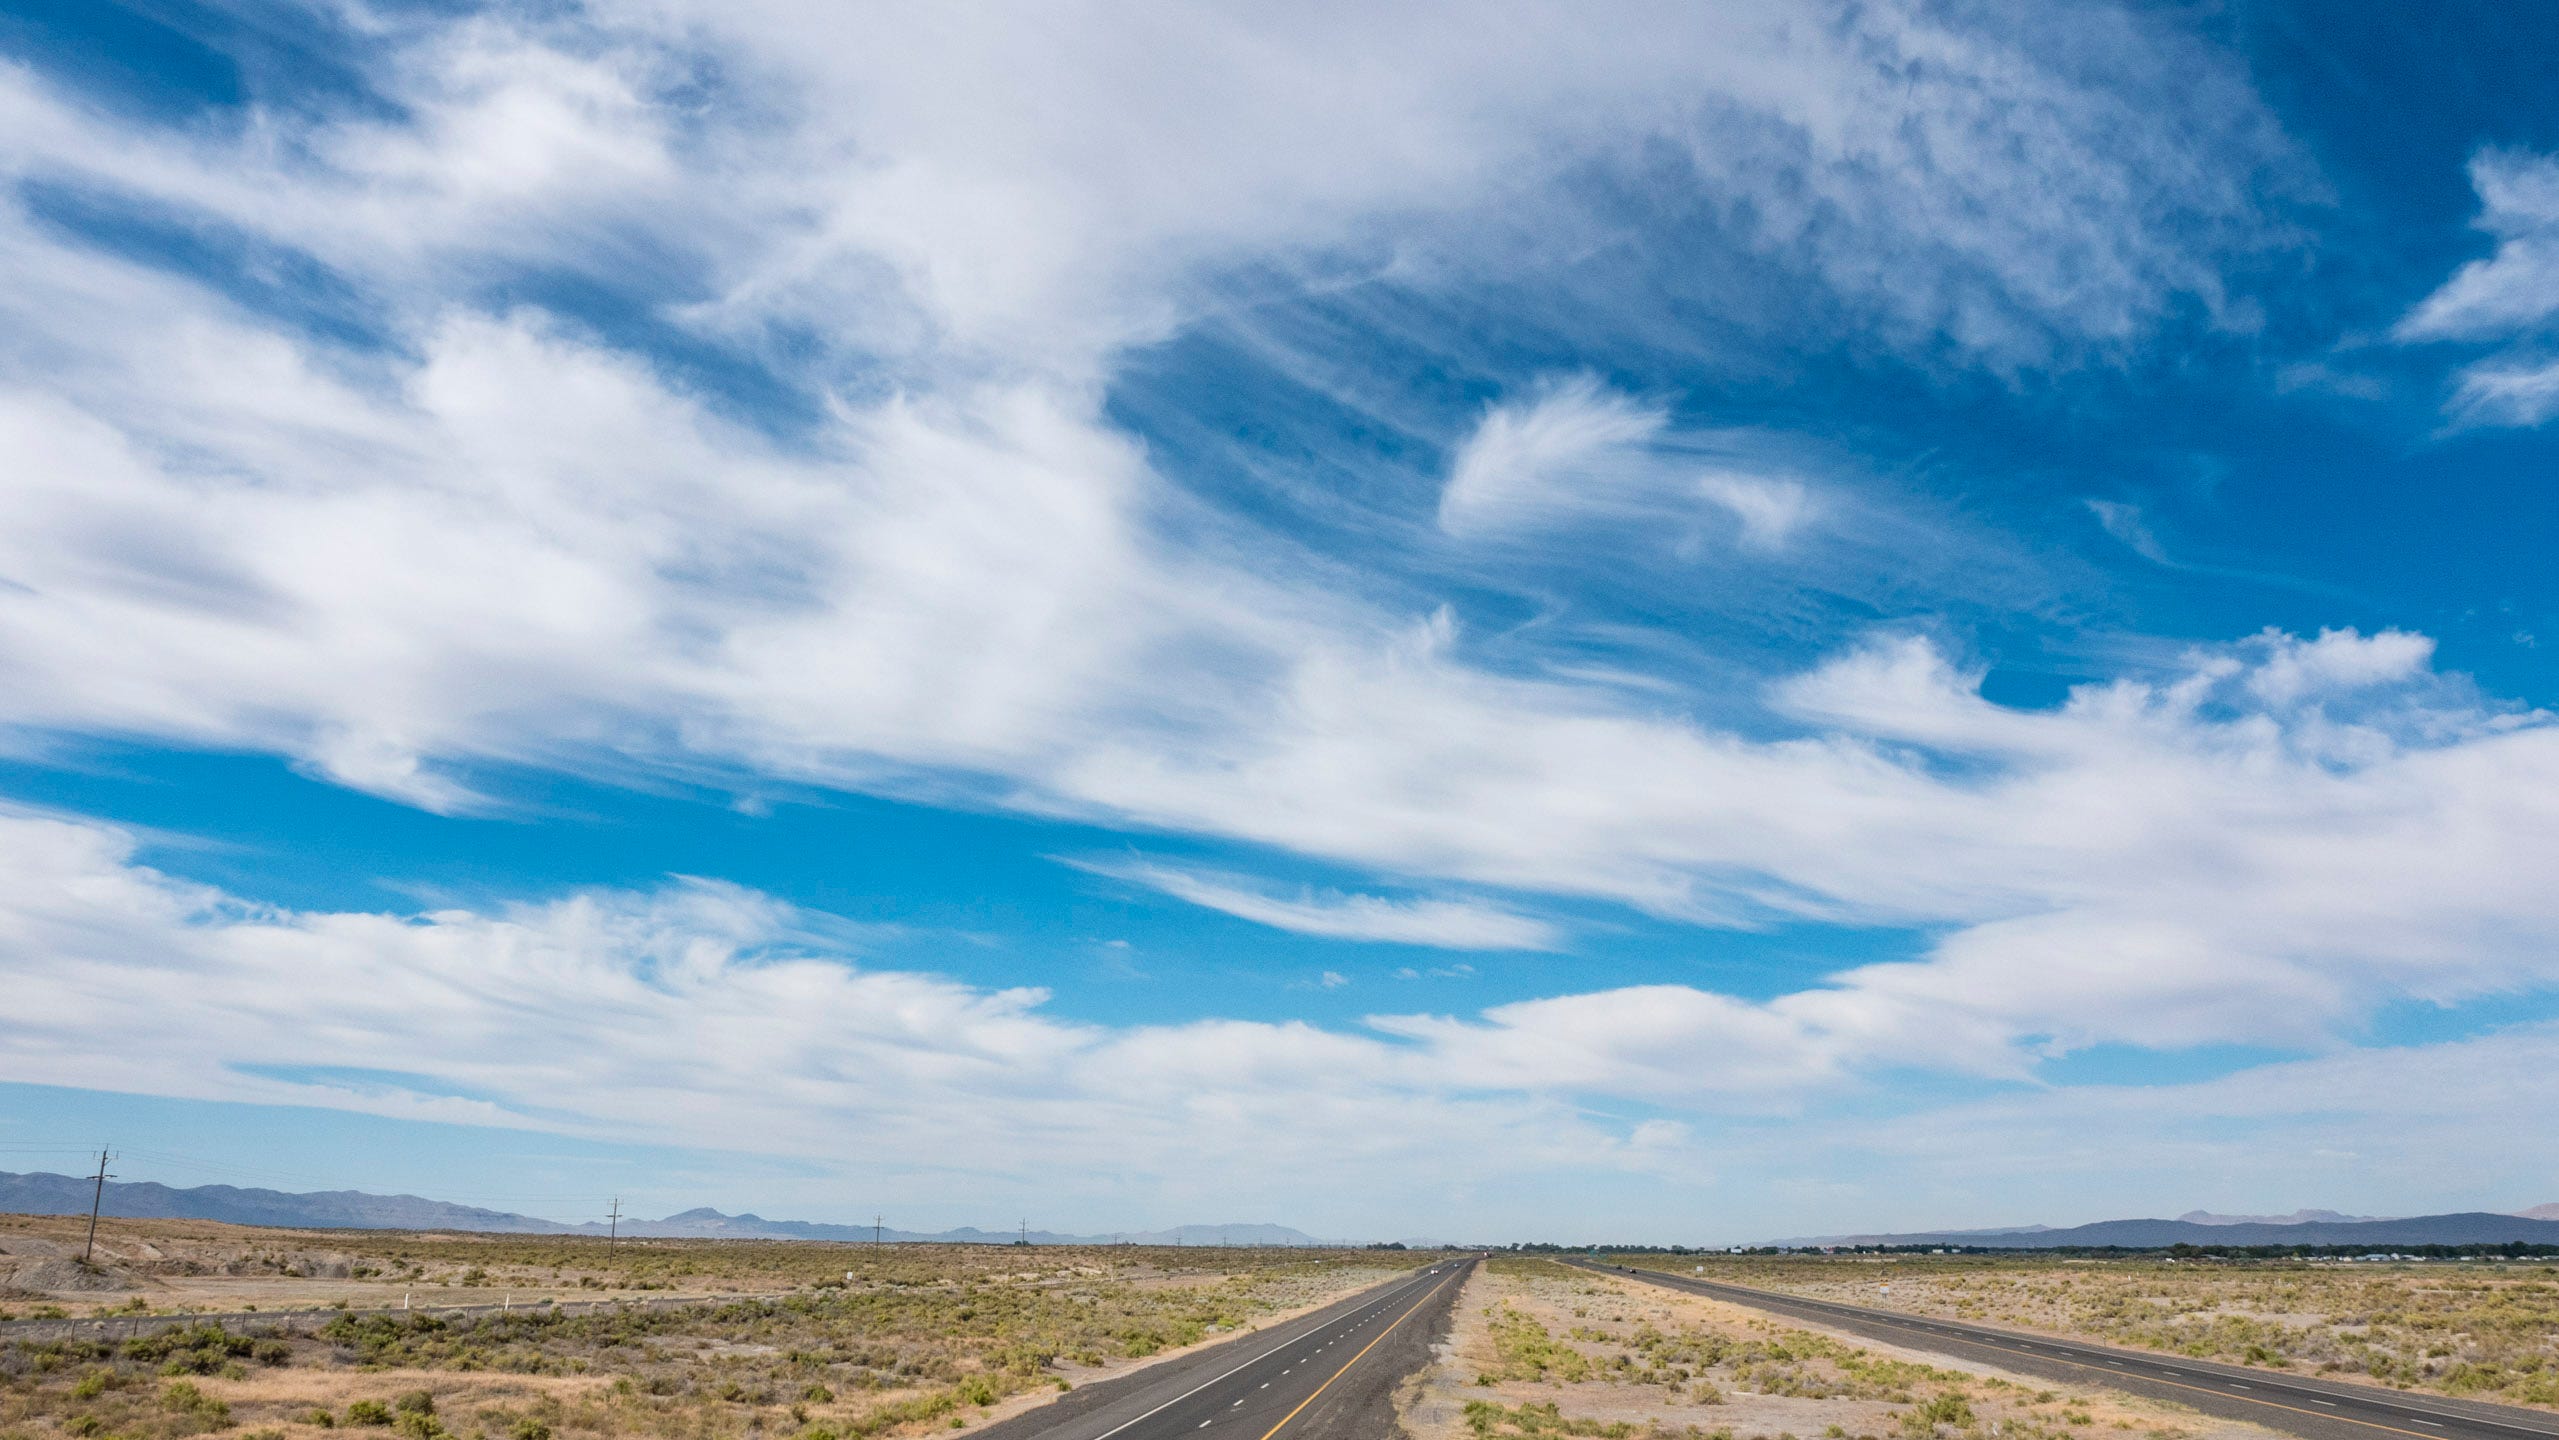 Photo of clouds floating in a blue sky over the flat desert of Nevada. They sky is a cool, blue, the clouds white and whispy. The sky takes up the upper 80% of the photo while the expansive desert of Nevada occupies the lower 20%. The desert is dotted with faded green brush. The interstate cuts across the desert to a vanishing point on the distant horizon, where the silhouettes of jagget mountains can be seen. The land is dwarfed by the sky.